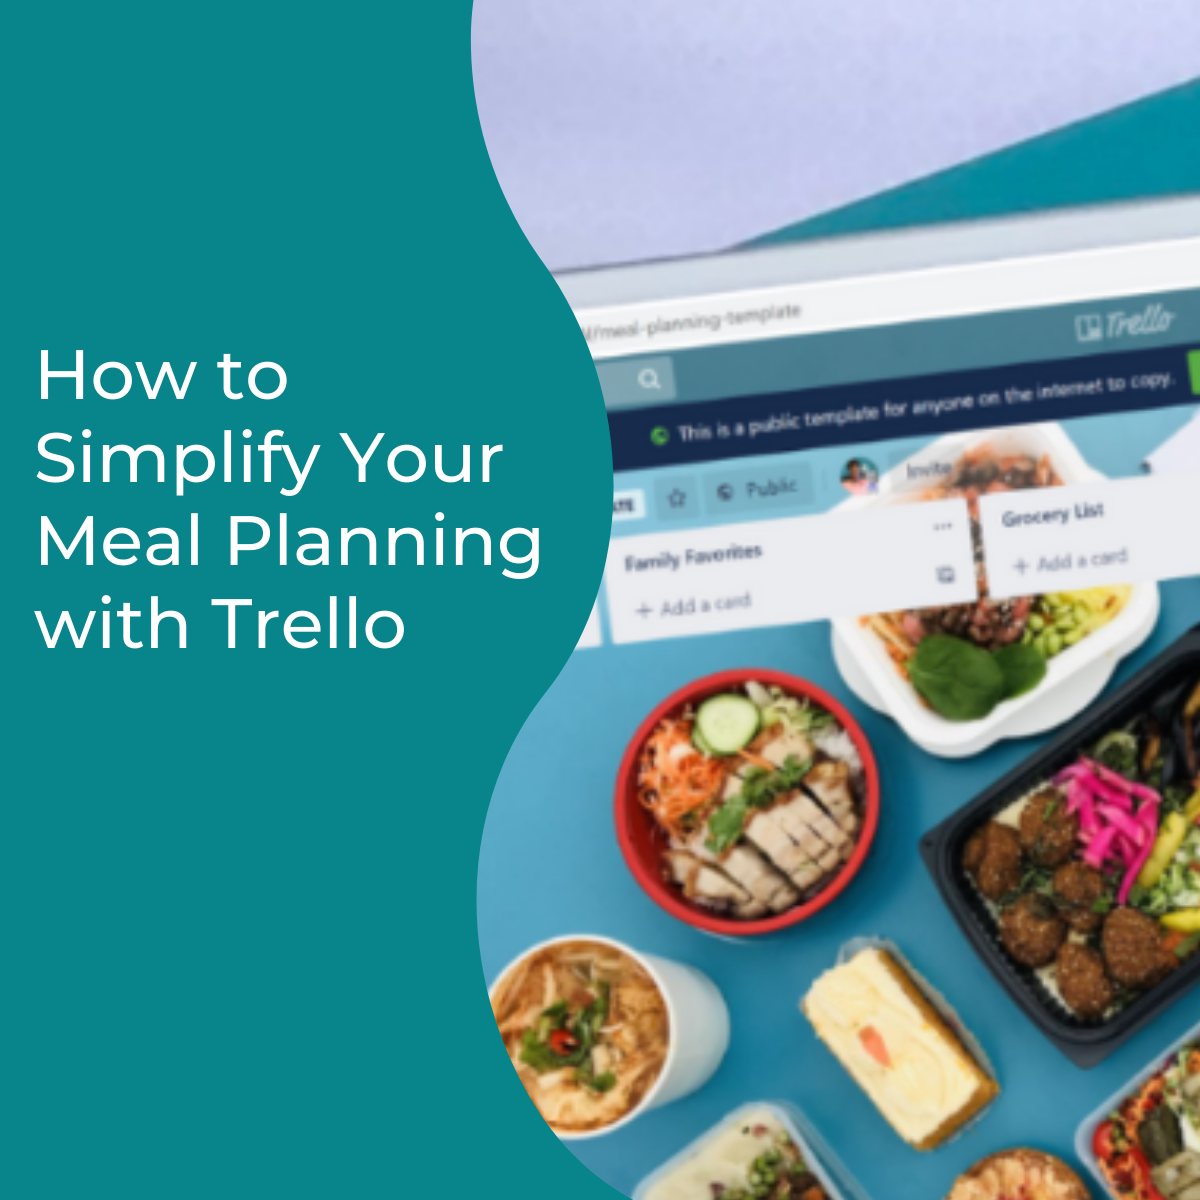 You are currently viewing How to Simplify Your Meal Planning with Trello